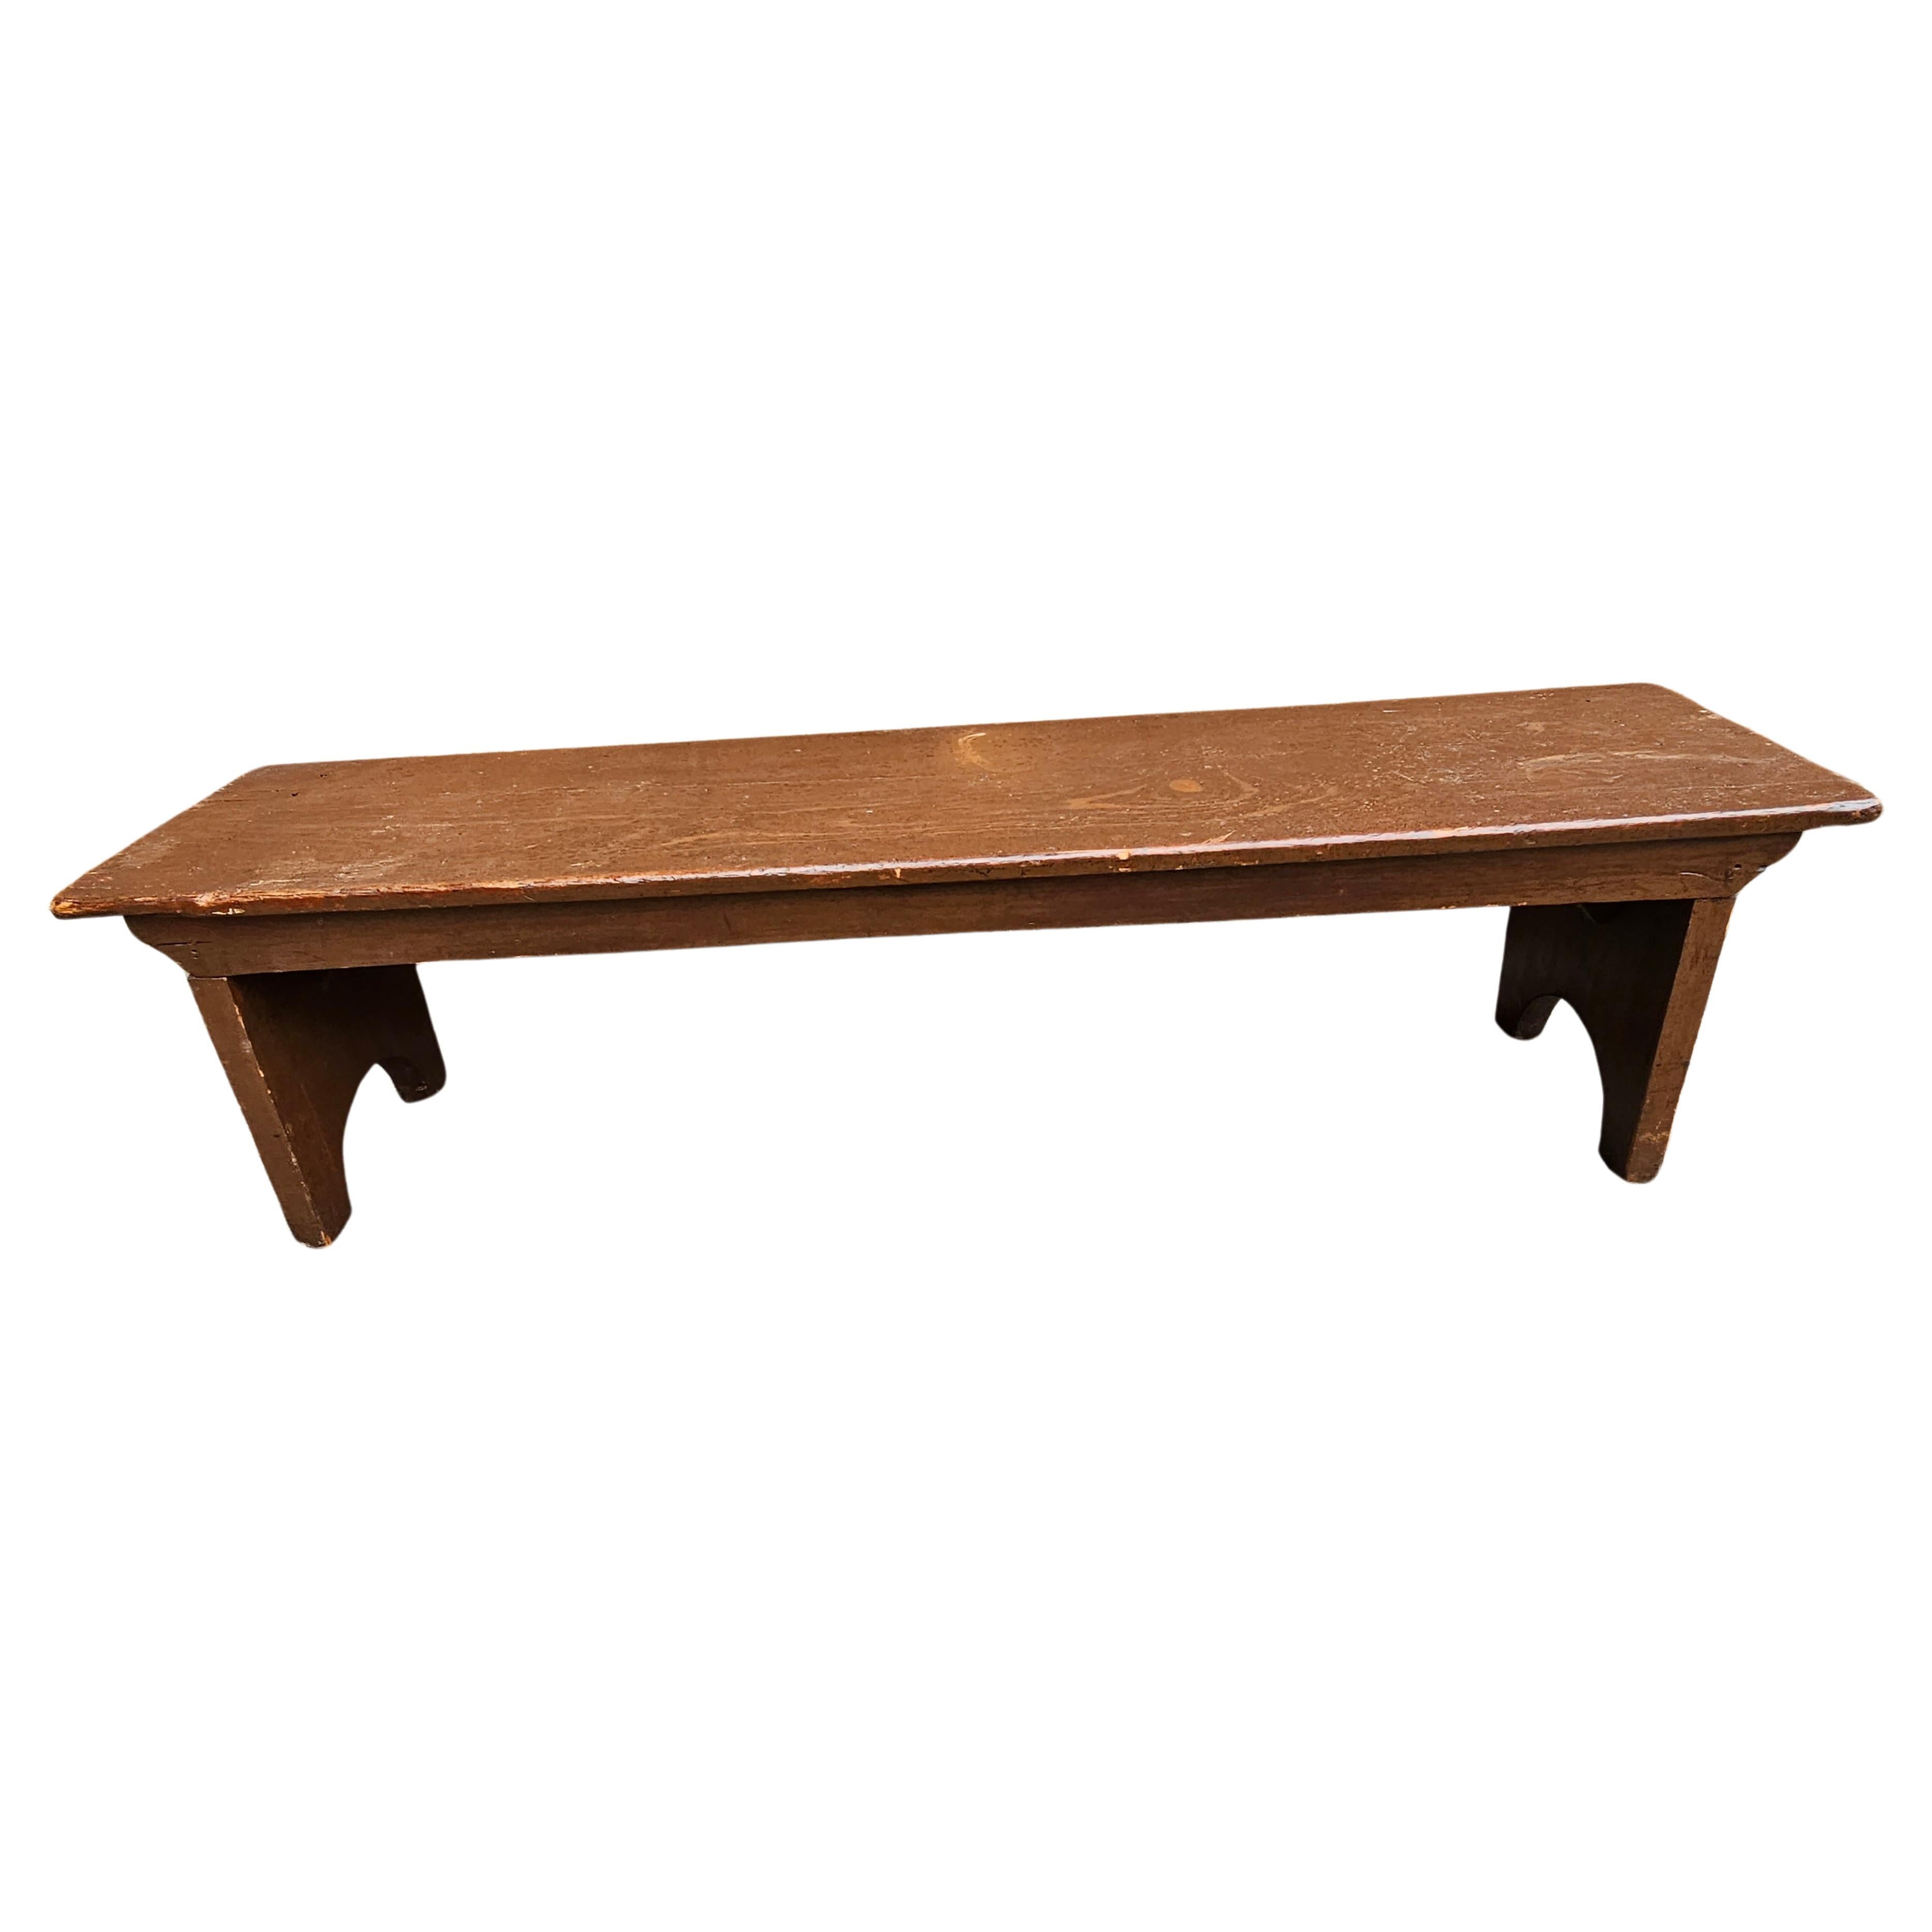 Early 20th Century Handcrafted American Colonial Elm Low Bench